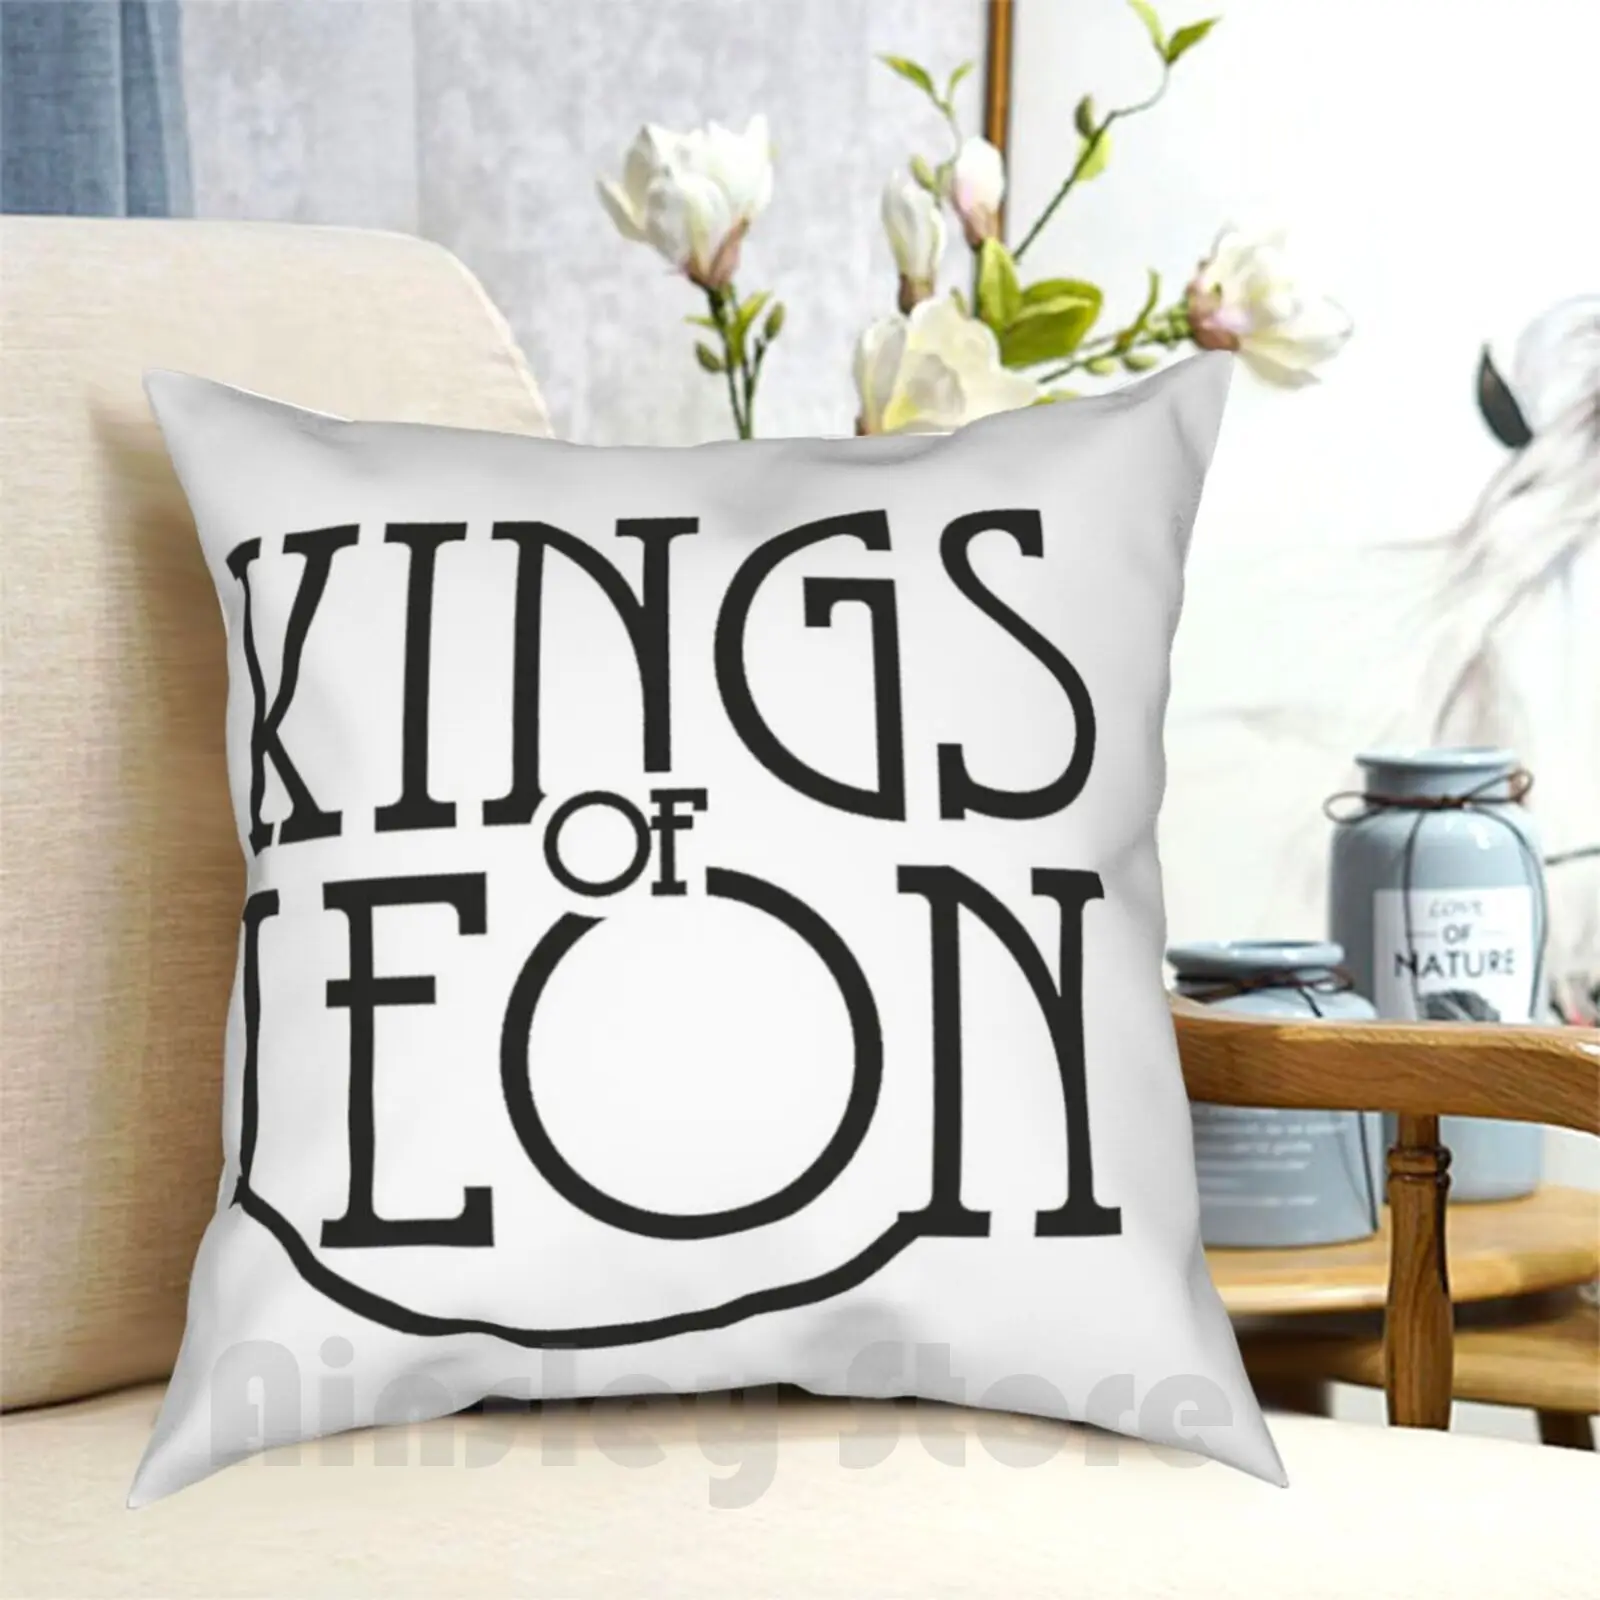 

Kings Of Leon Logo Pillow Case Printed Home Soft Throw Pillow Kings Leon Band Music Lets Blues American Guitar Riff Gig